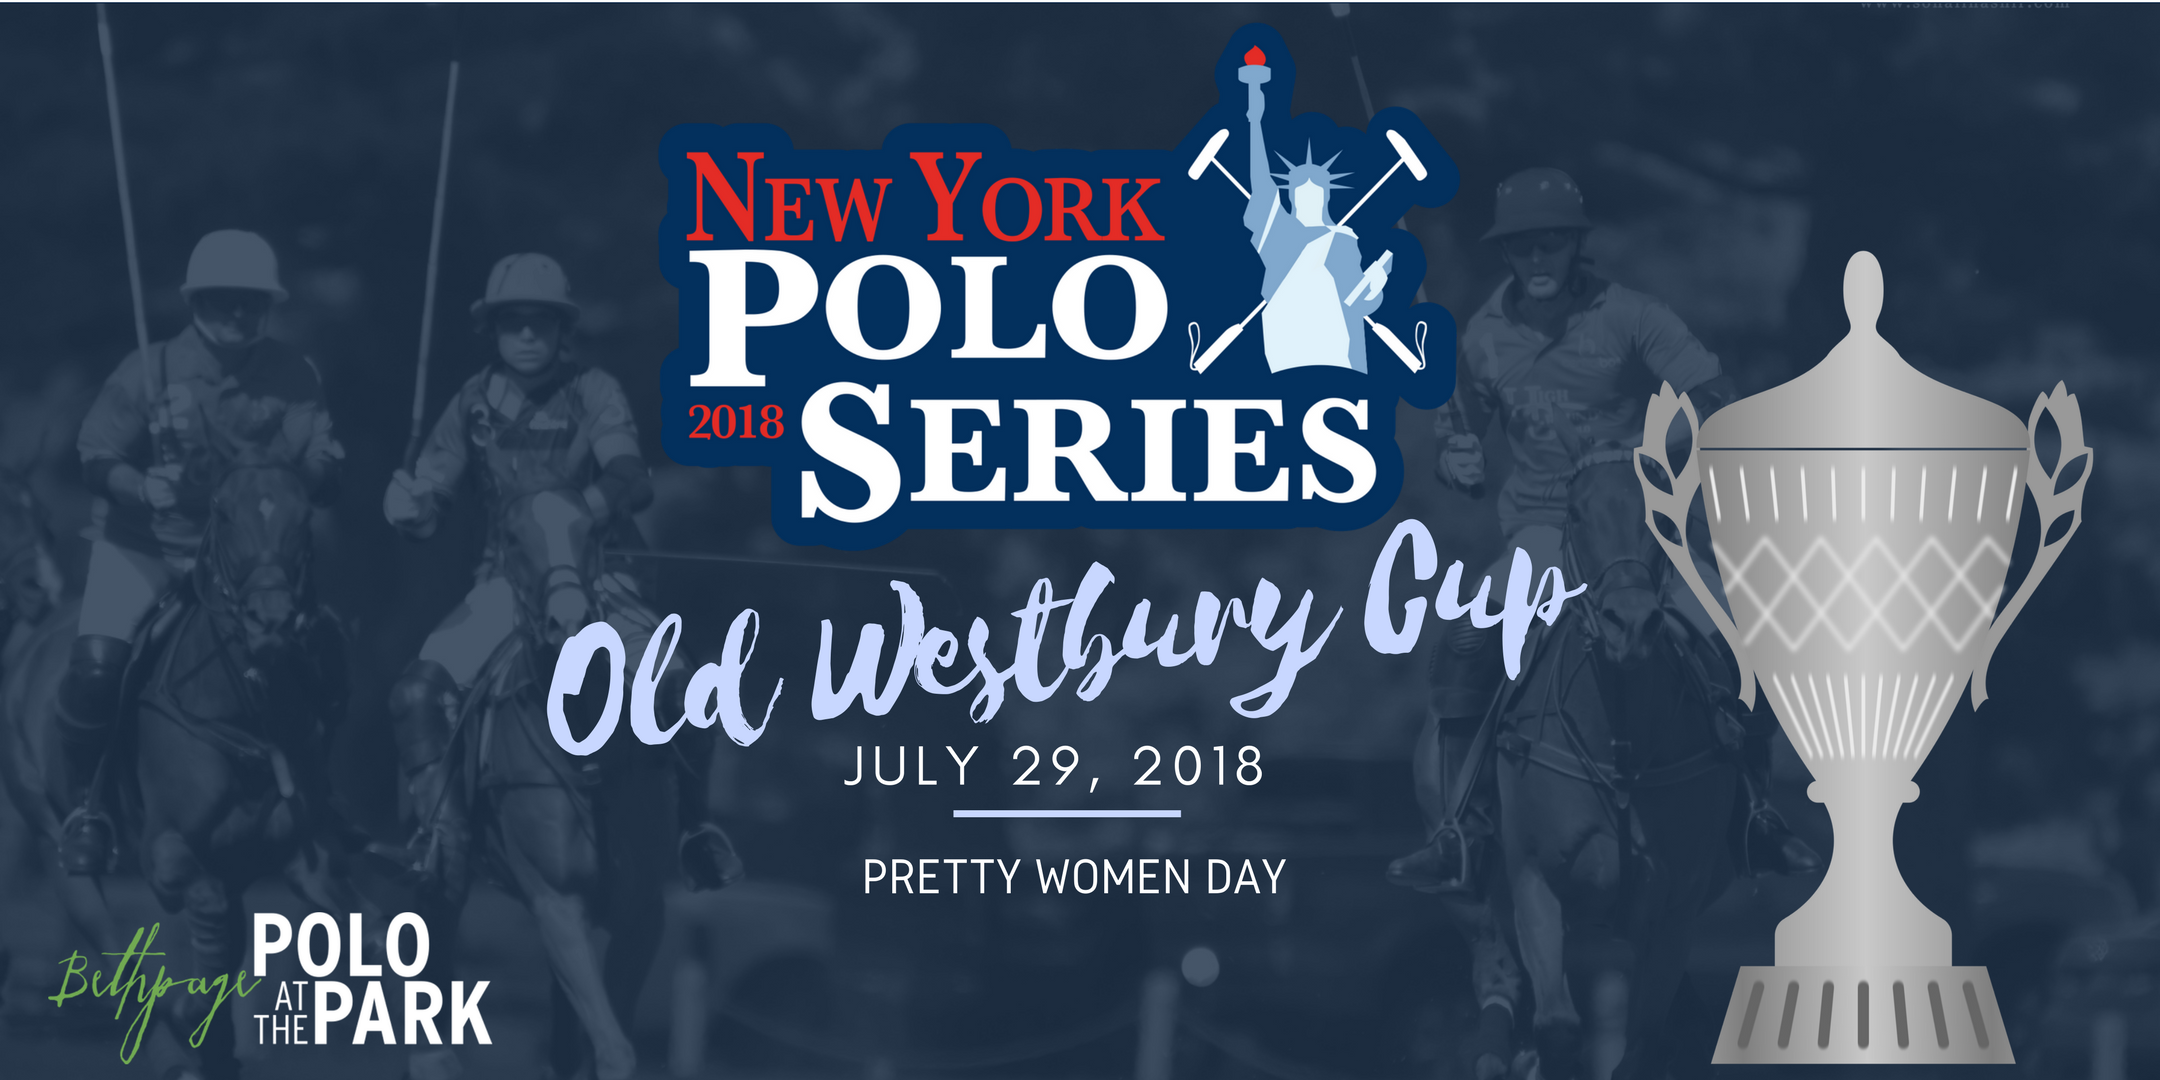 New York Polo Series (7/29 Old Westbury Cup)